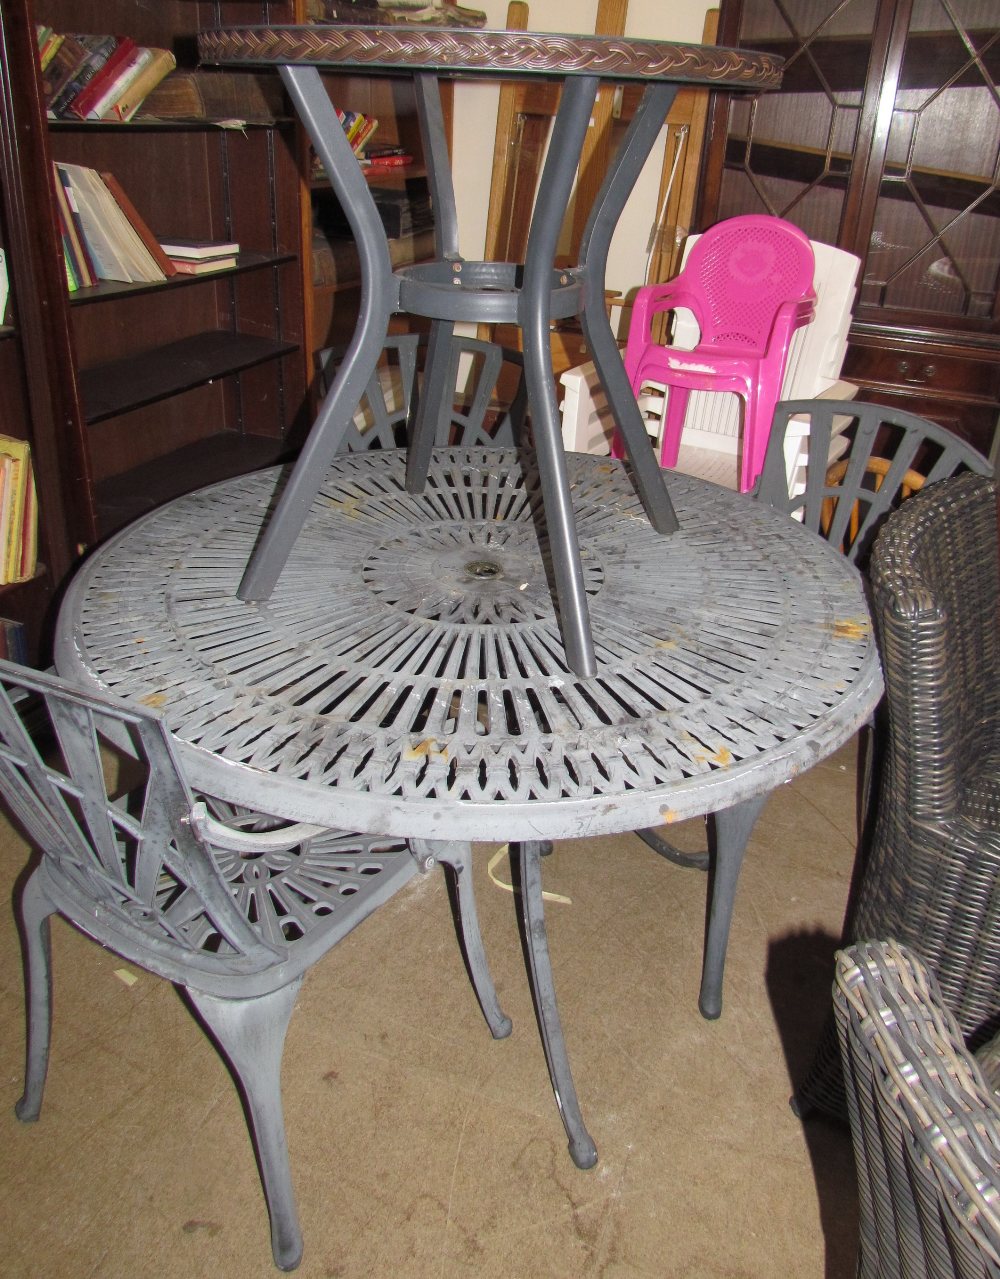 Garden furniture - a metal table and three chairs together with a glass topped table,